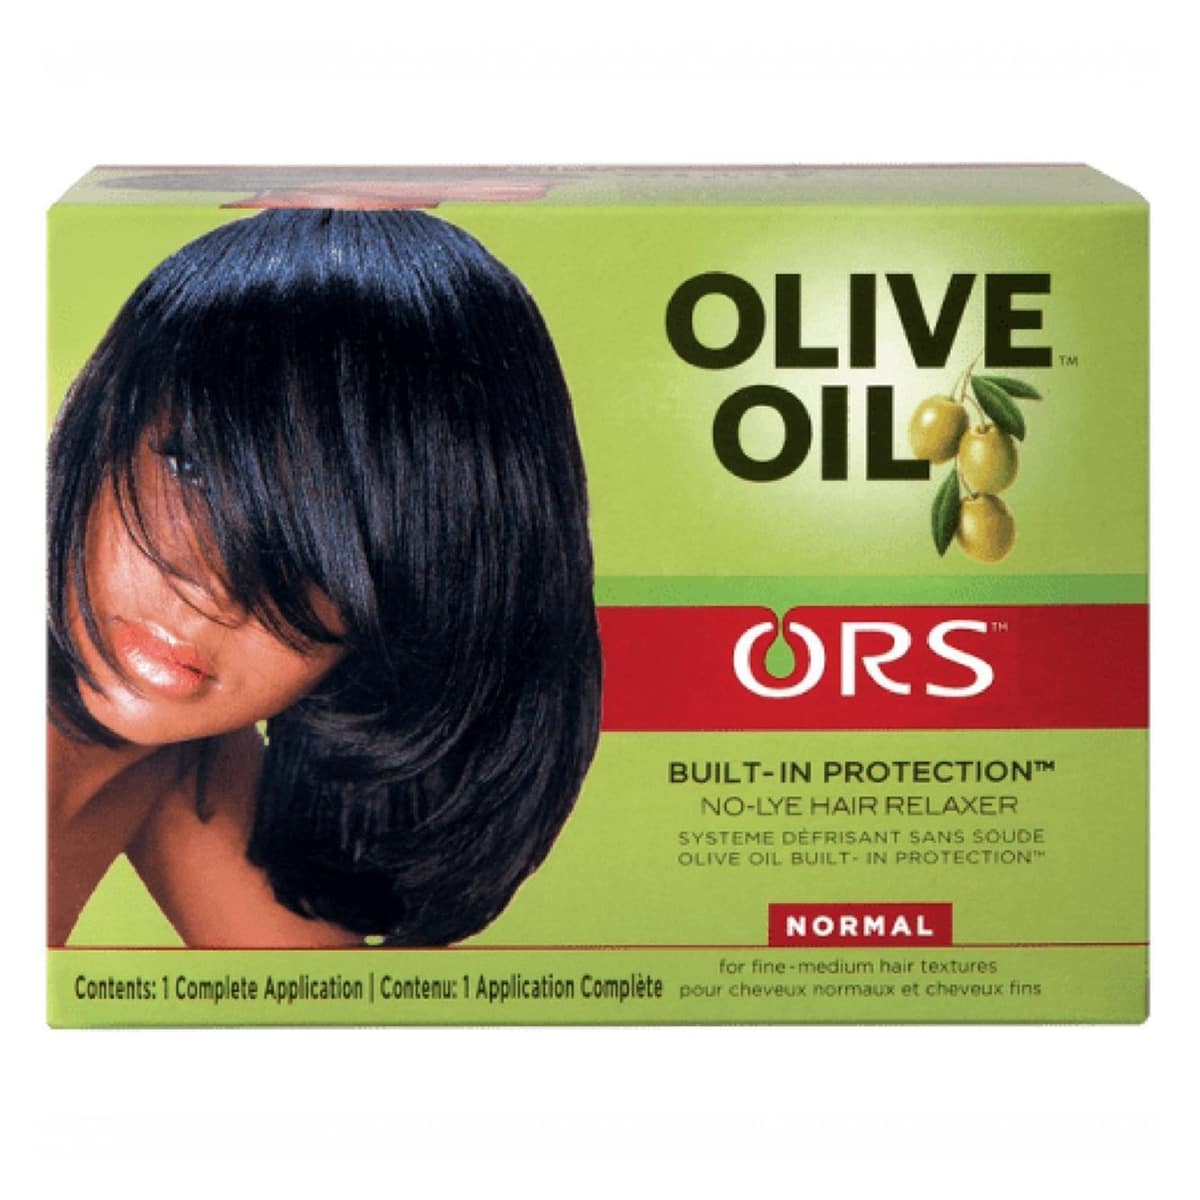 Buy Organic Root Stimulator (ORS) Olive Oil No-lye Hair Relaxer System Kit (Normal)